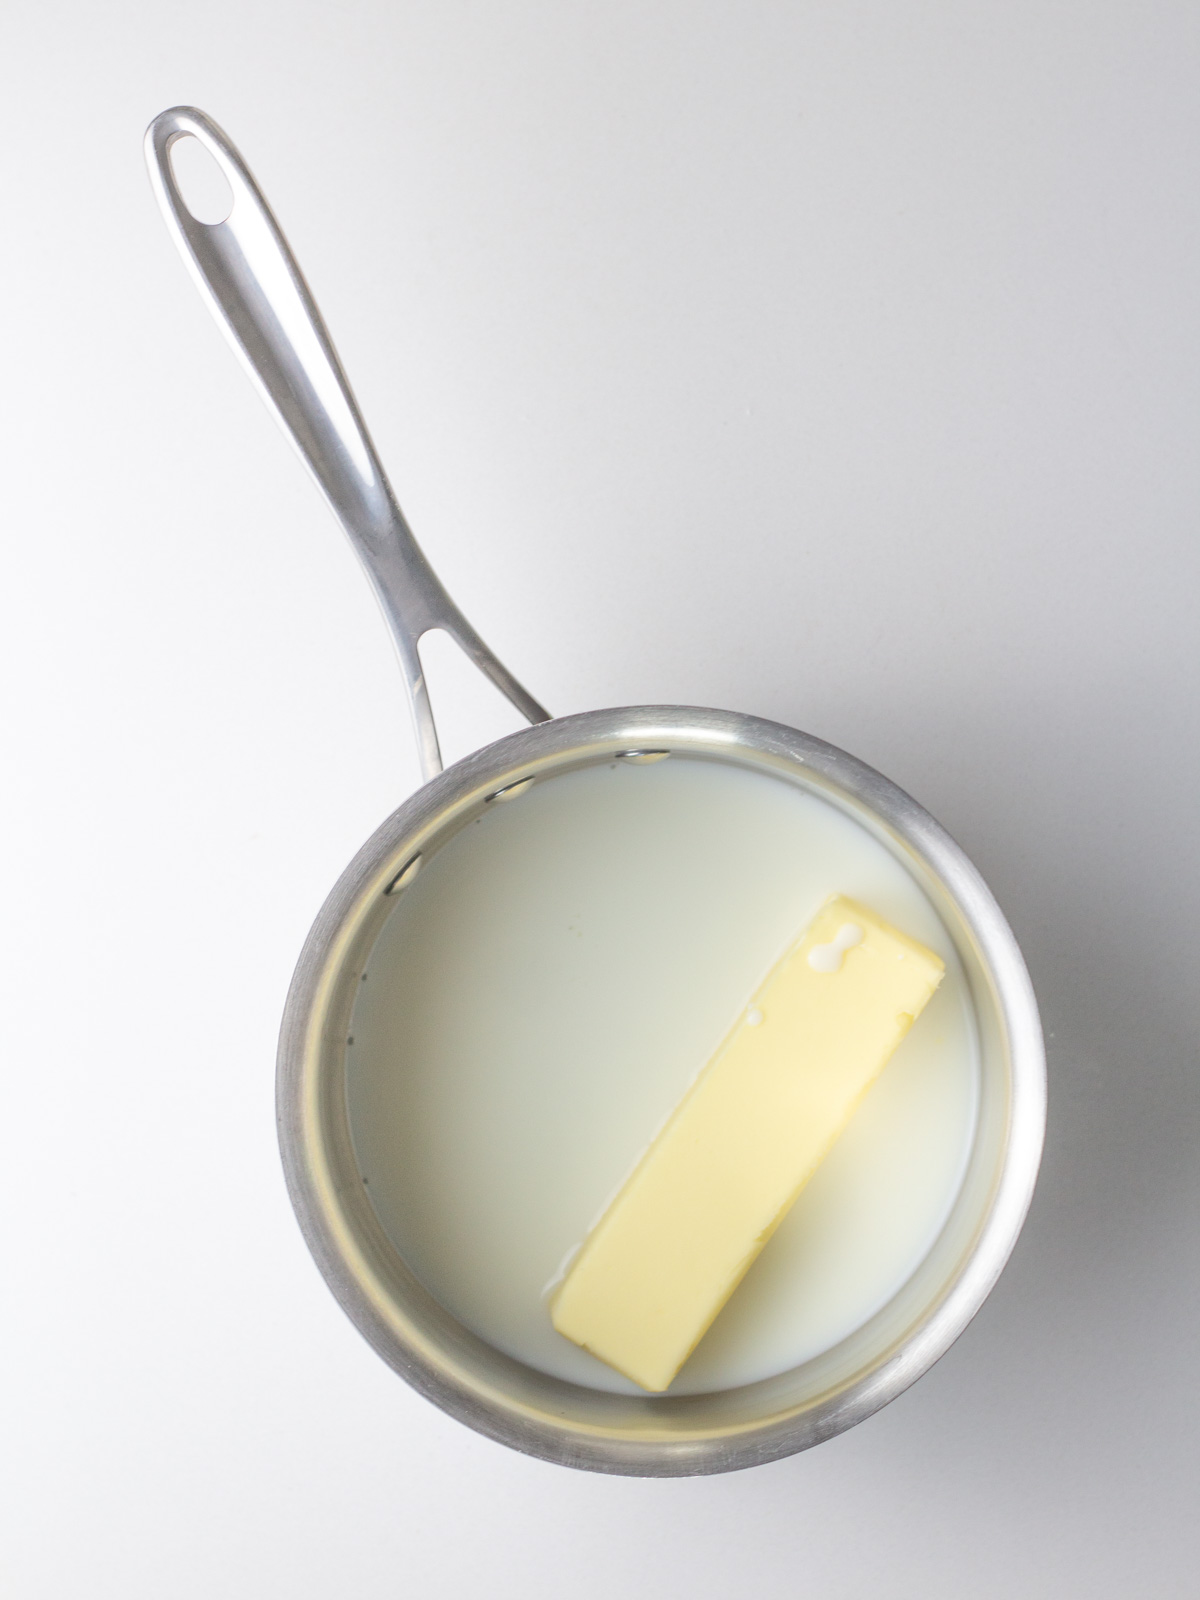 Milk and a stick of butter in a small silver saucepan.